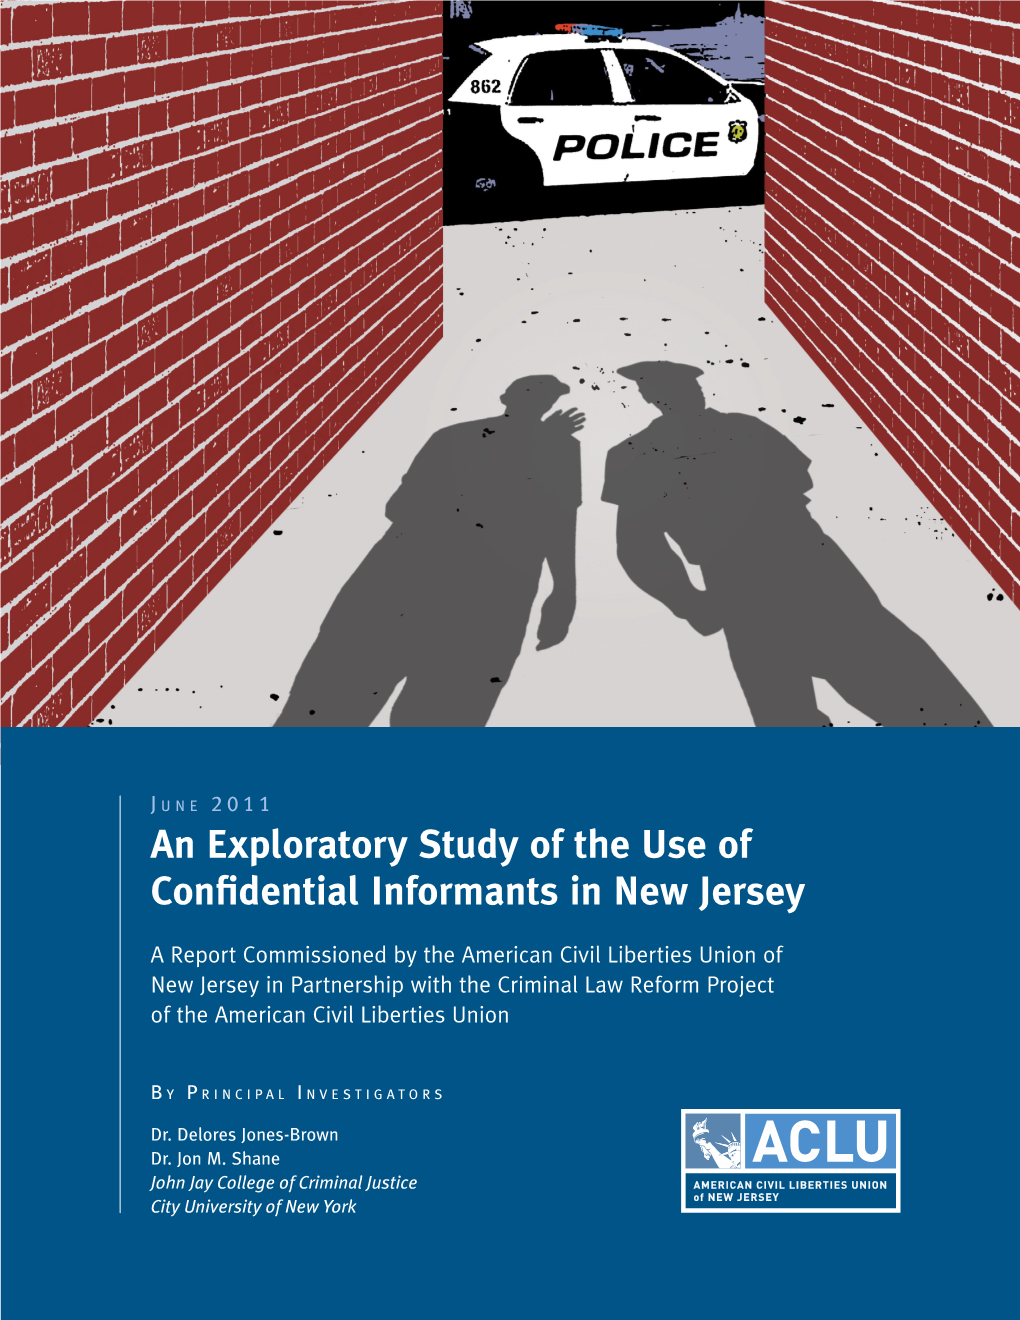 An Exploratory Study of the Use of Confidential Informants in New Jersey